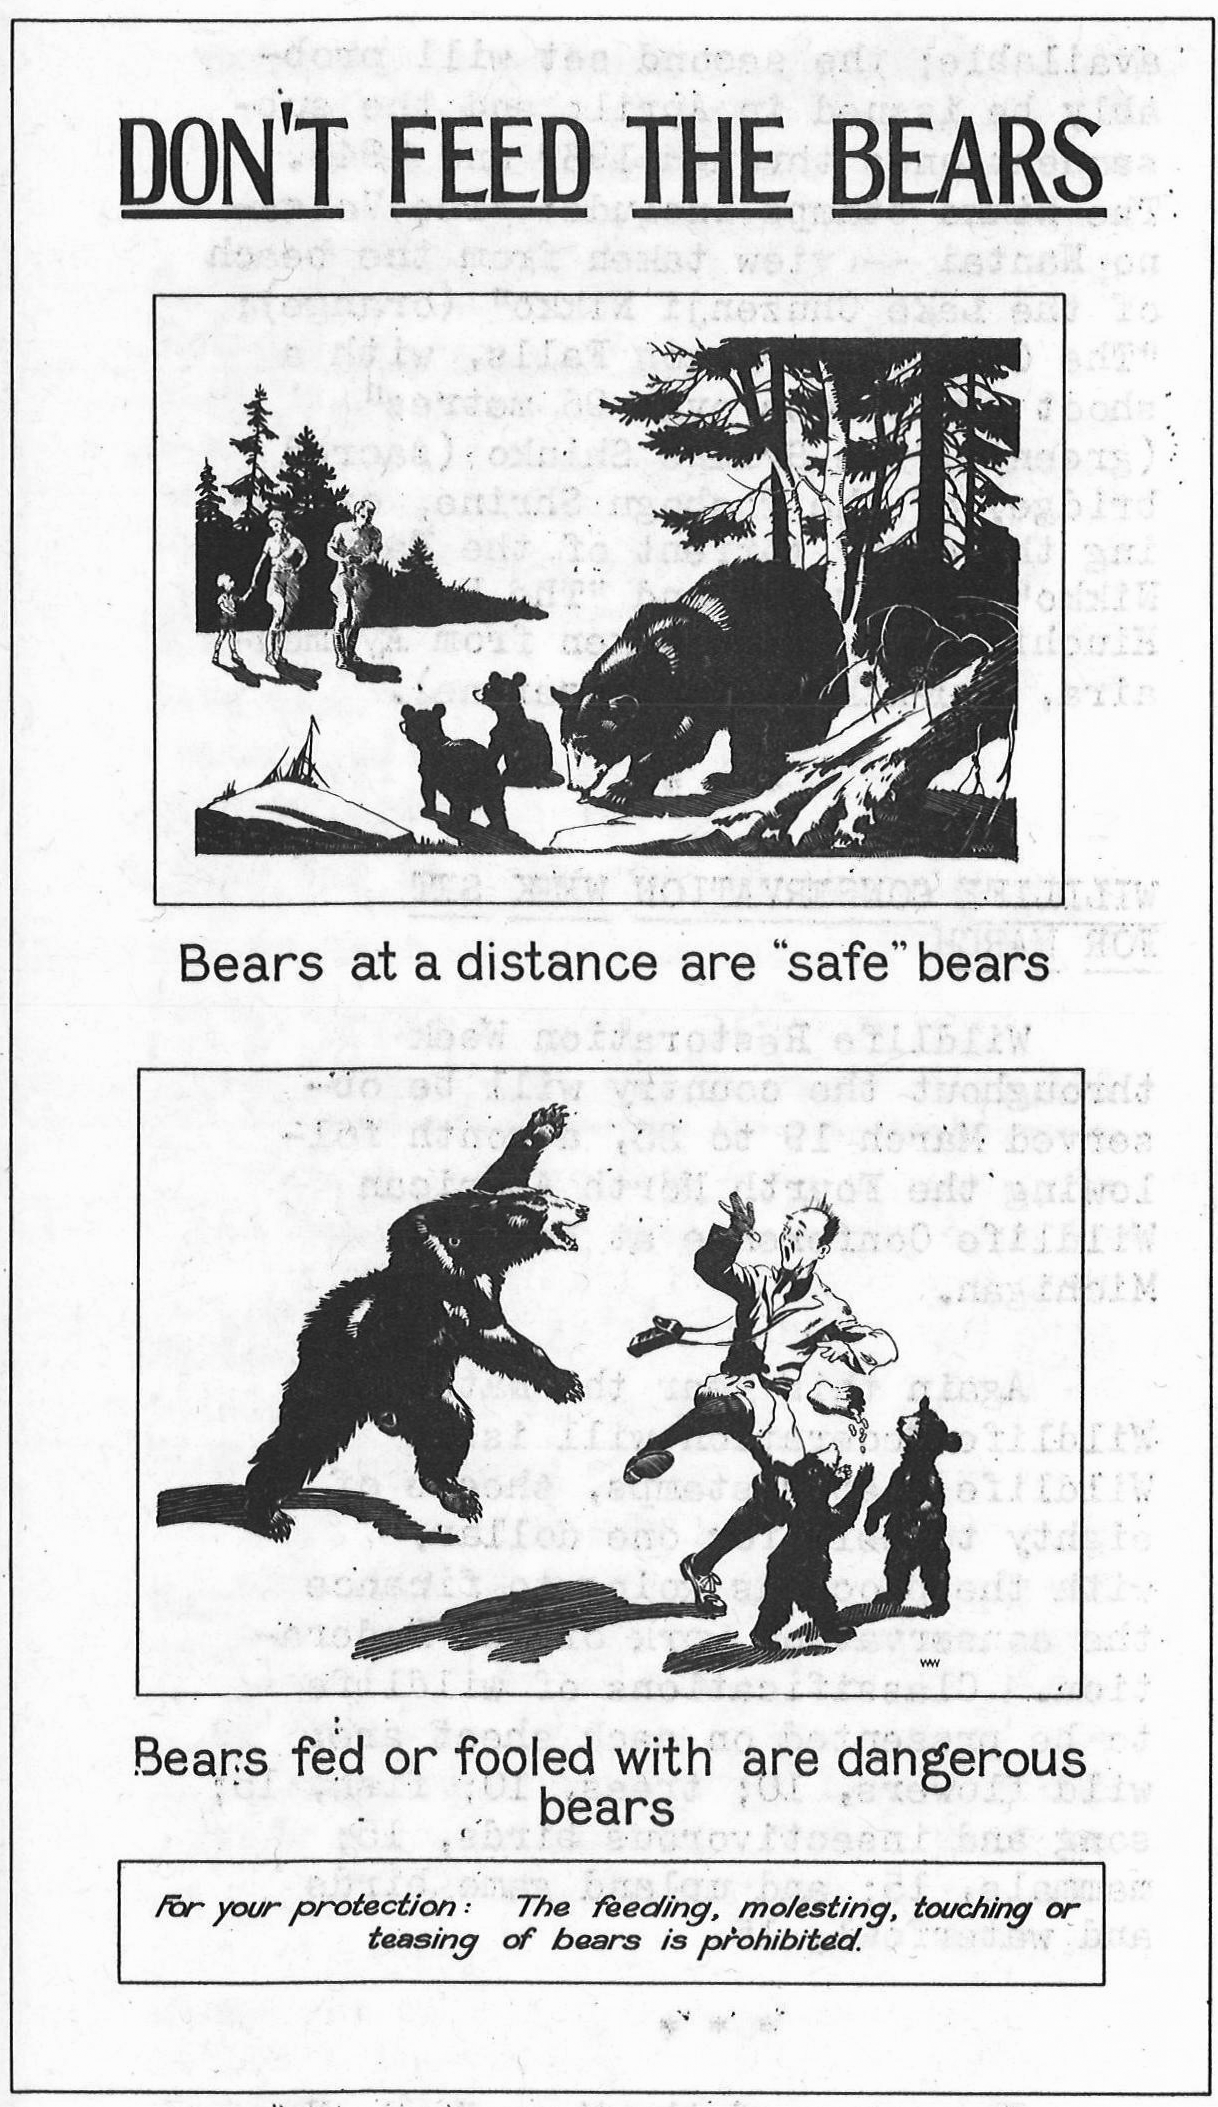 Poster titled "Don't Feed the Bears" showing bears at a safe distance and then attacking people who get too close